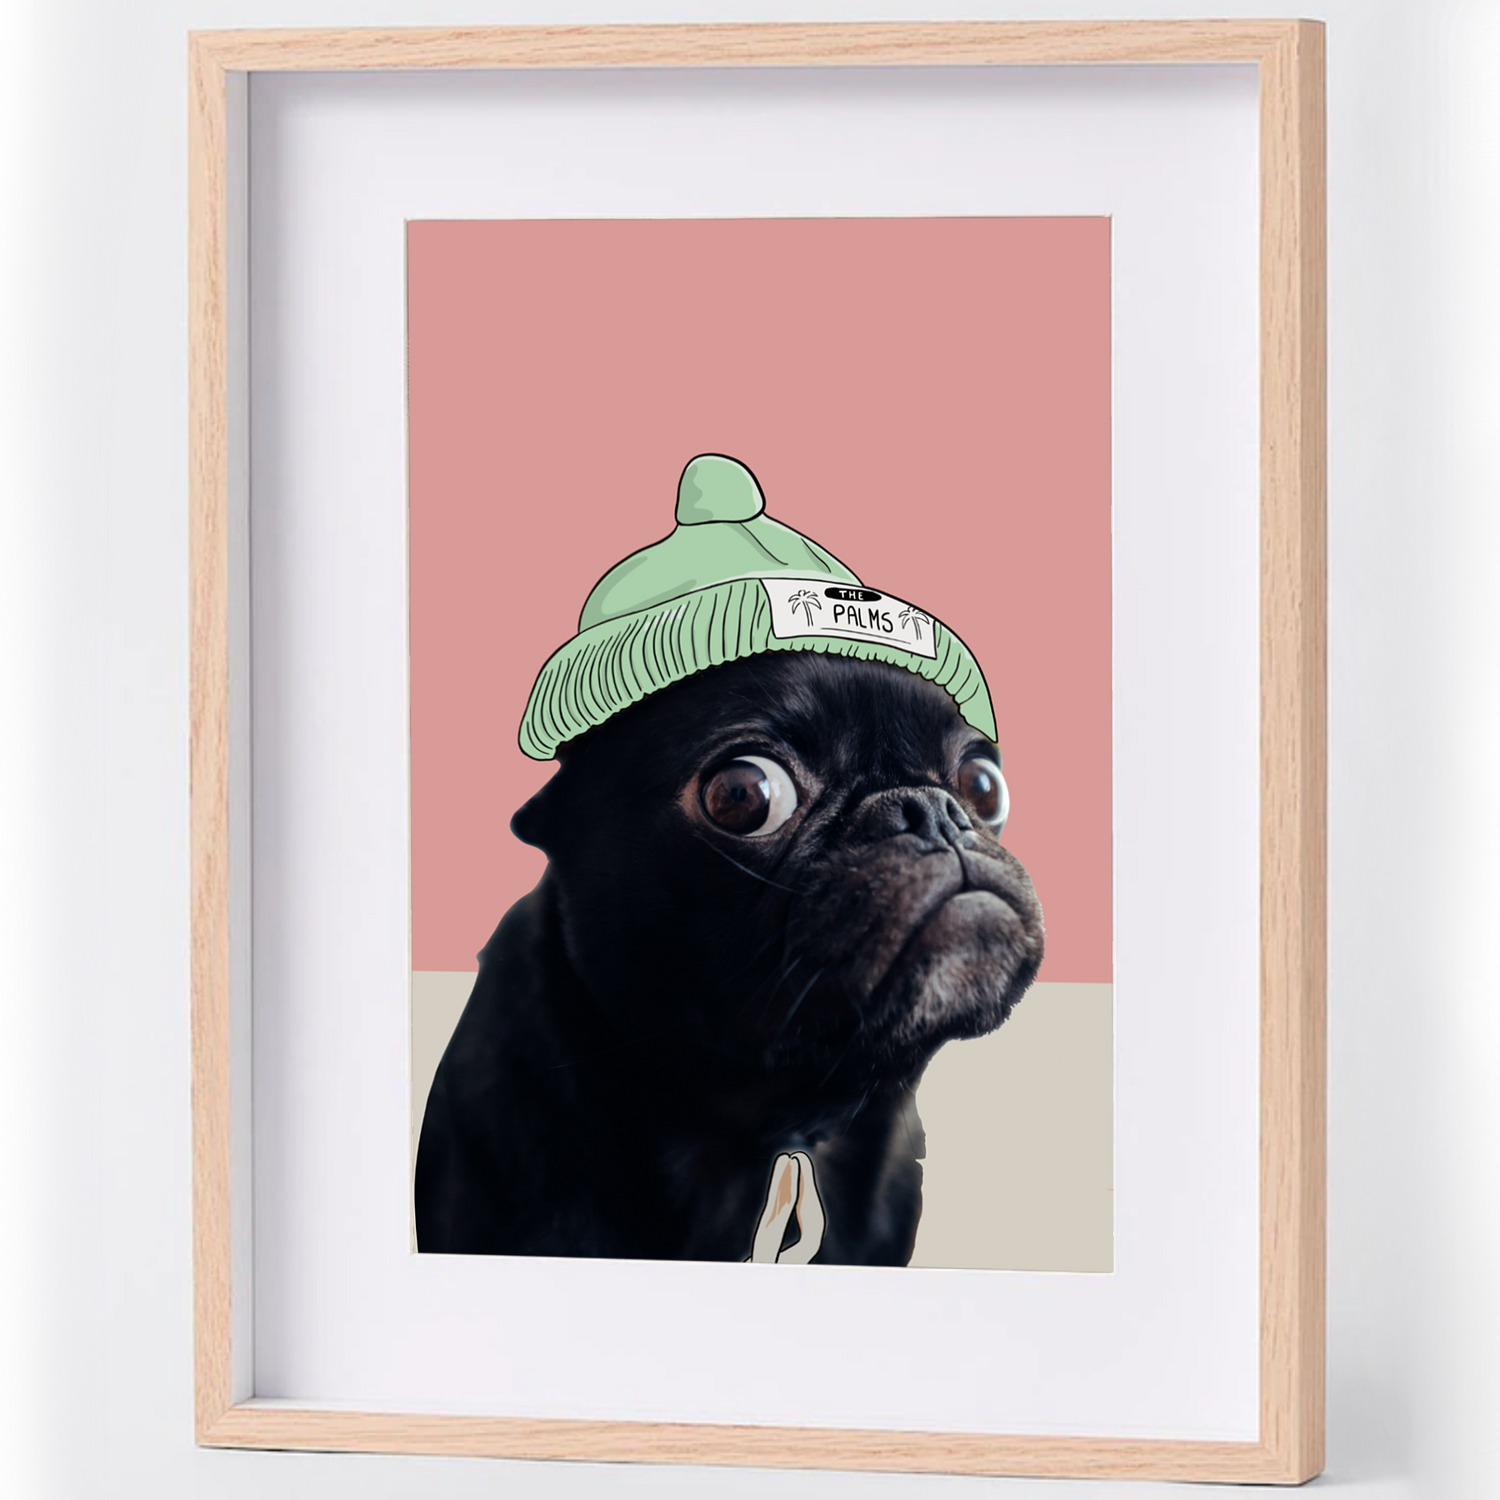 Image of a black pug ina beanie with a coral pink background.